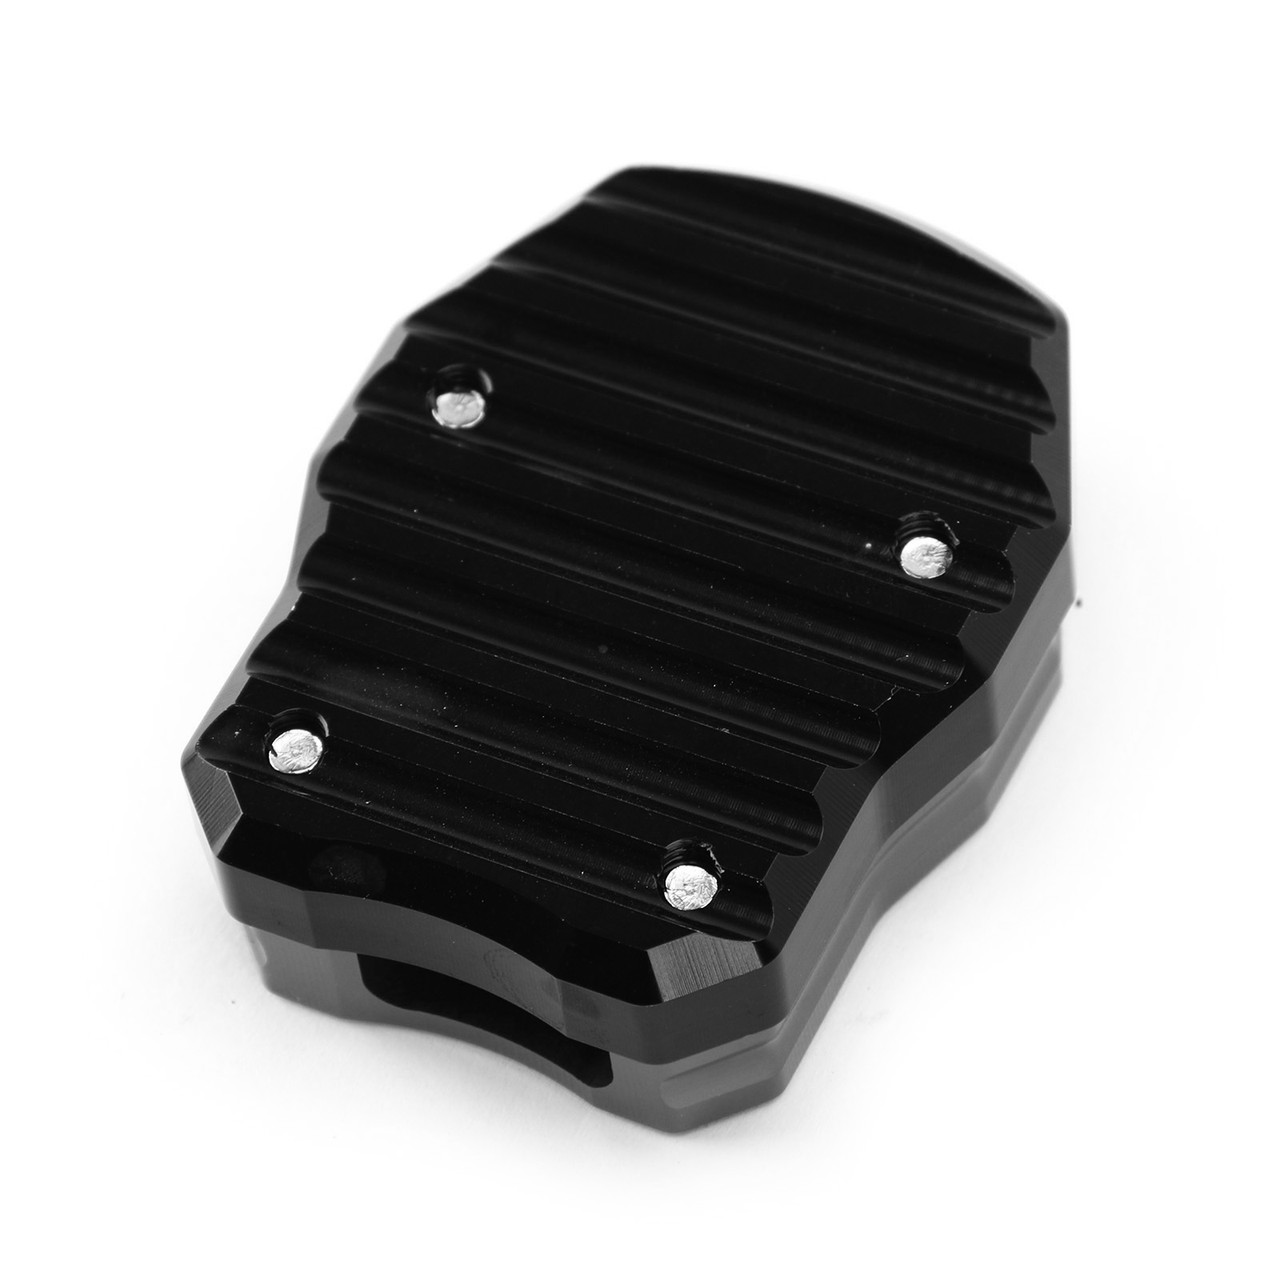 Kickstand Side Stand Extension Pad Fit For Honda ADV150 19-21 PCX 125 150 18-19 Black